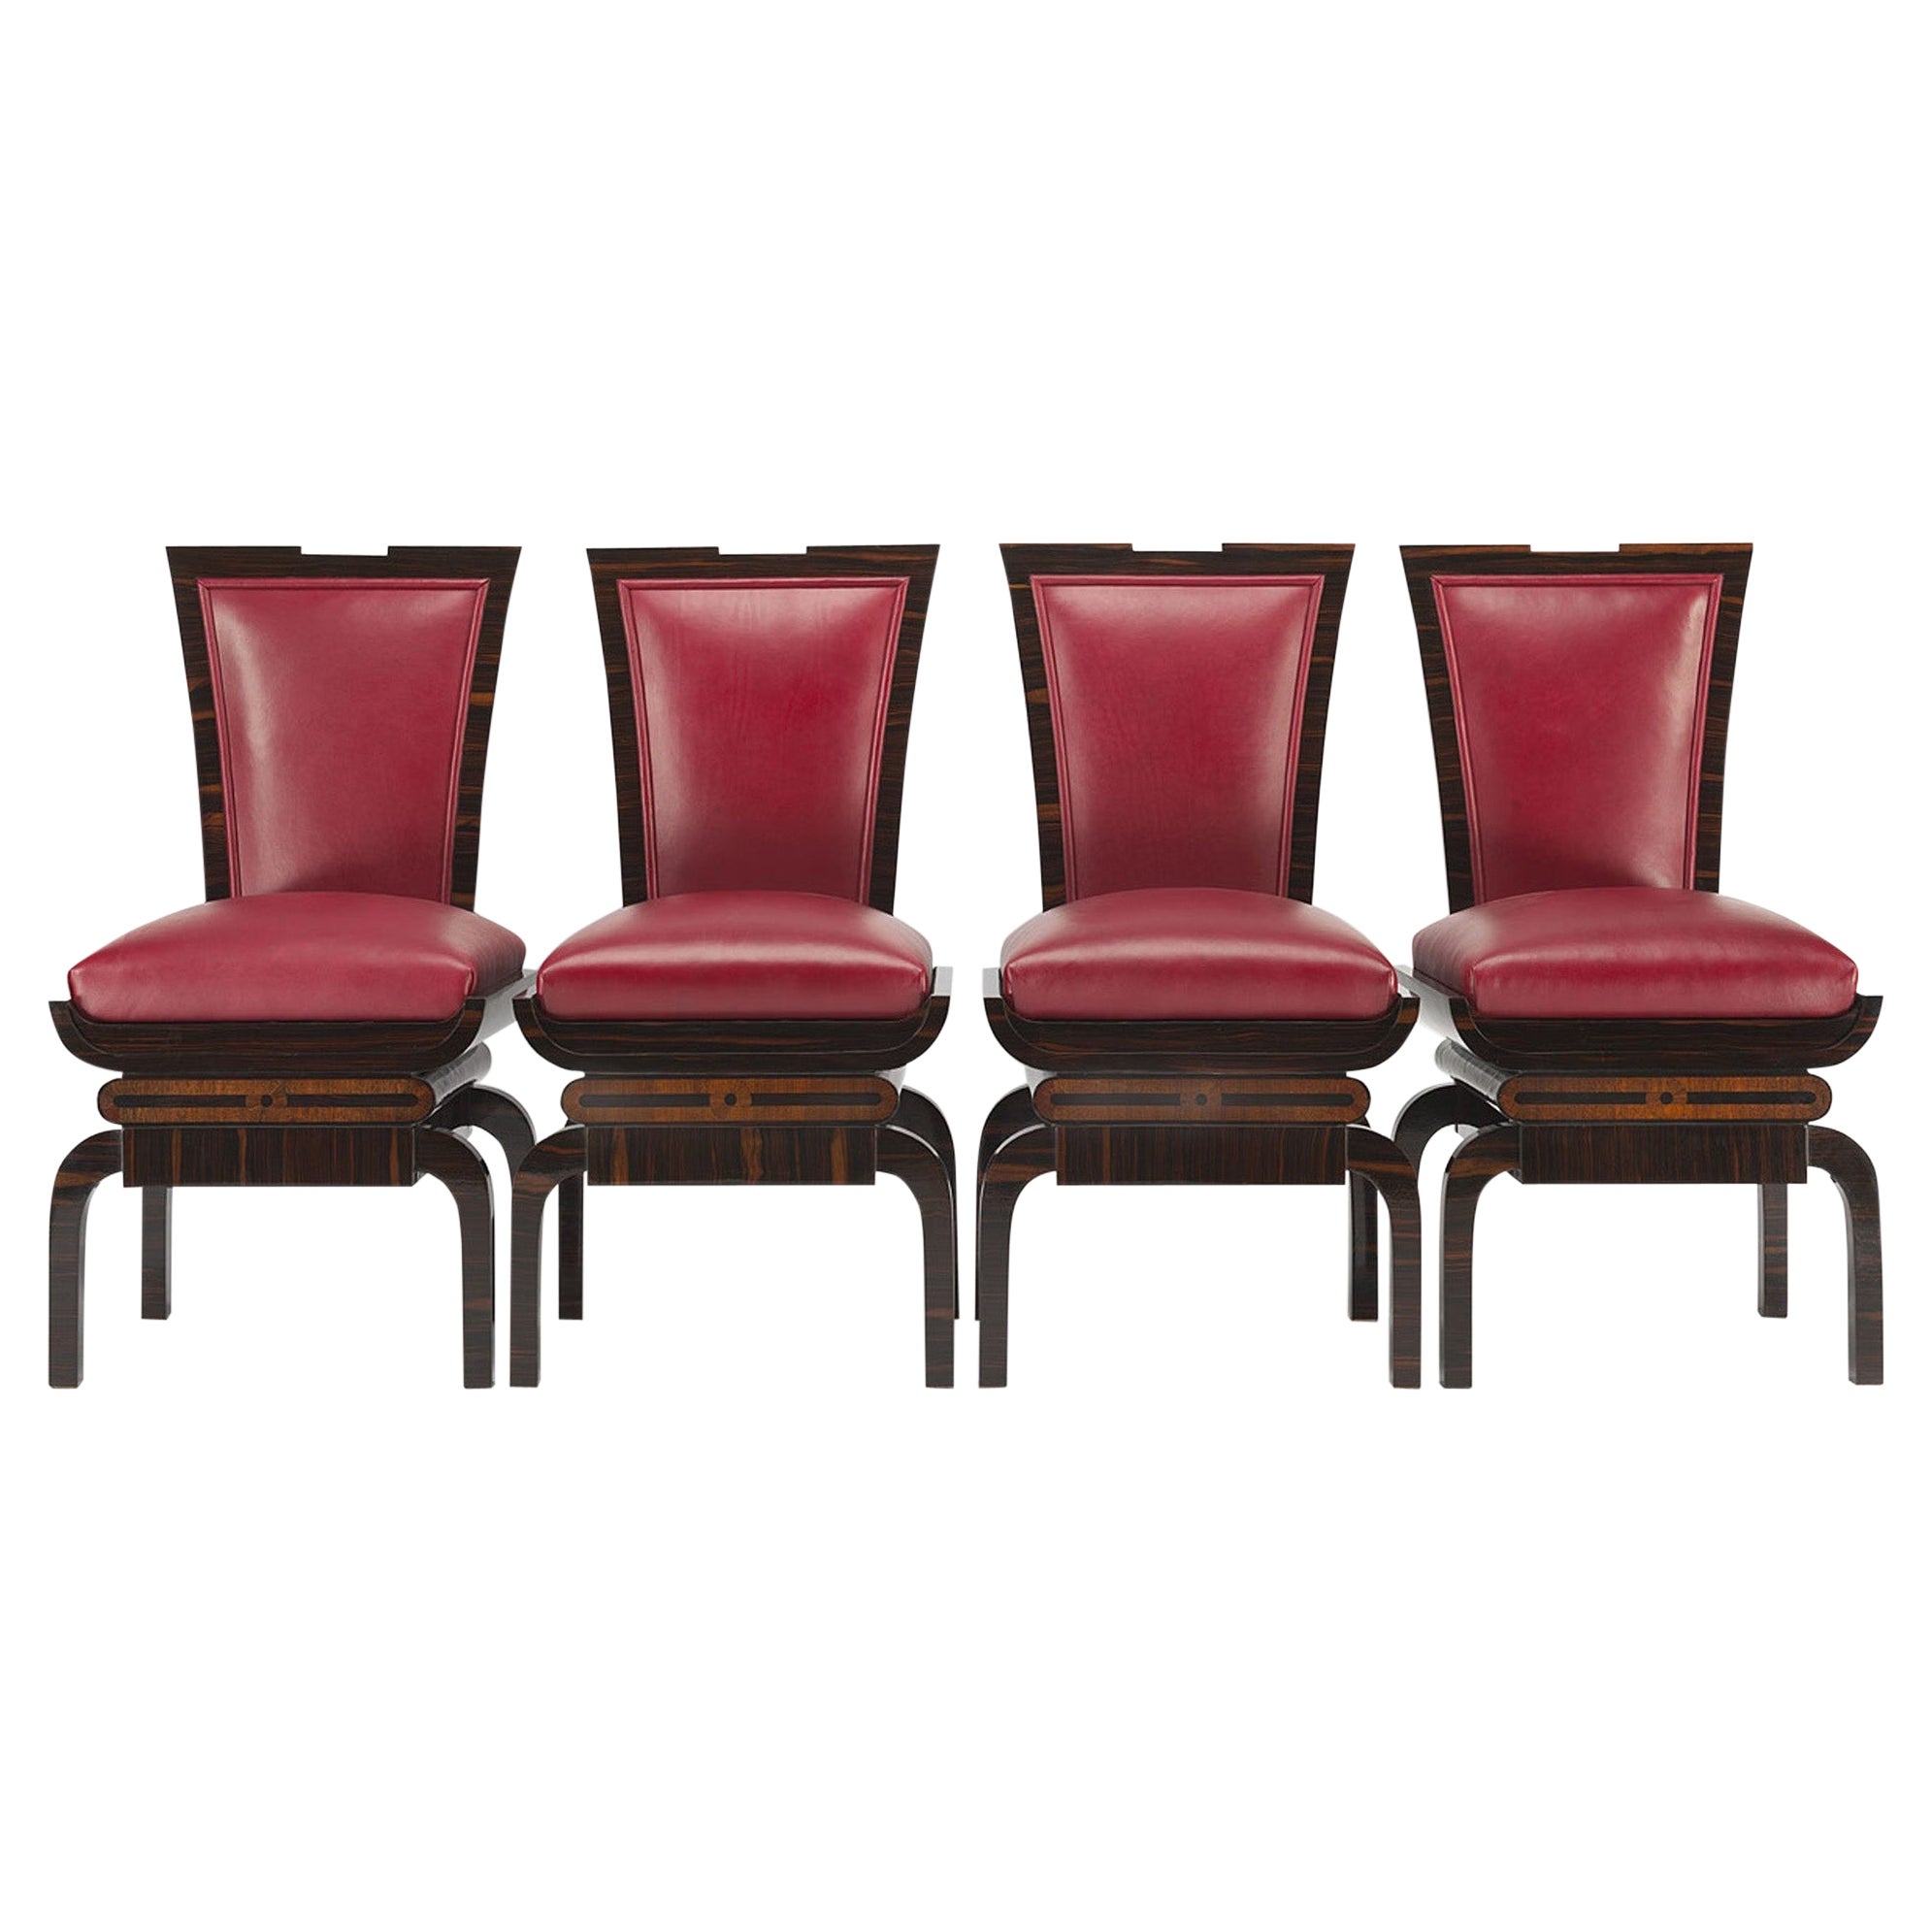 Red Art Deco Chairs from Czechia, 4 Pieces Made Out of Makasar